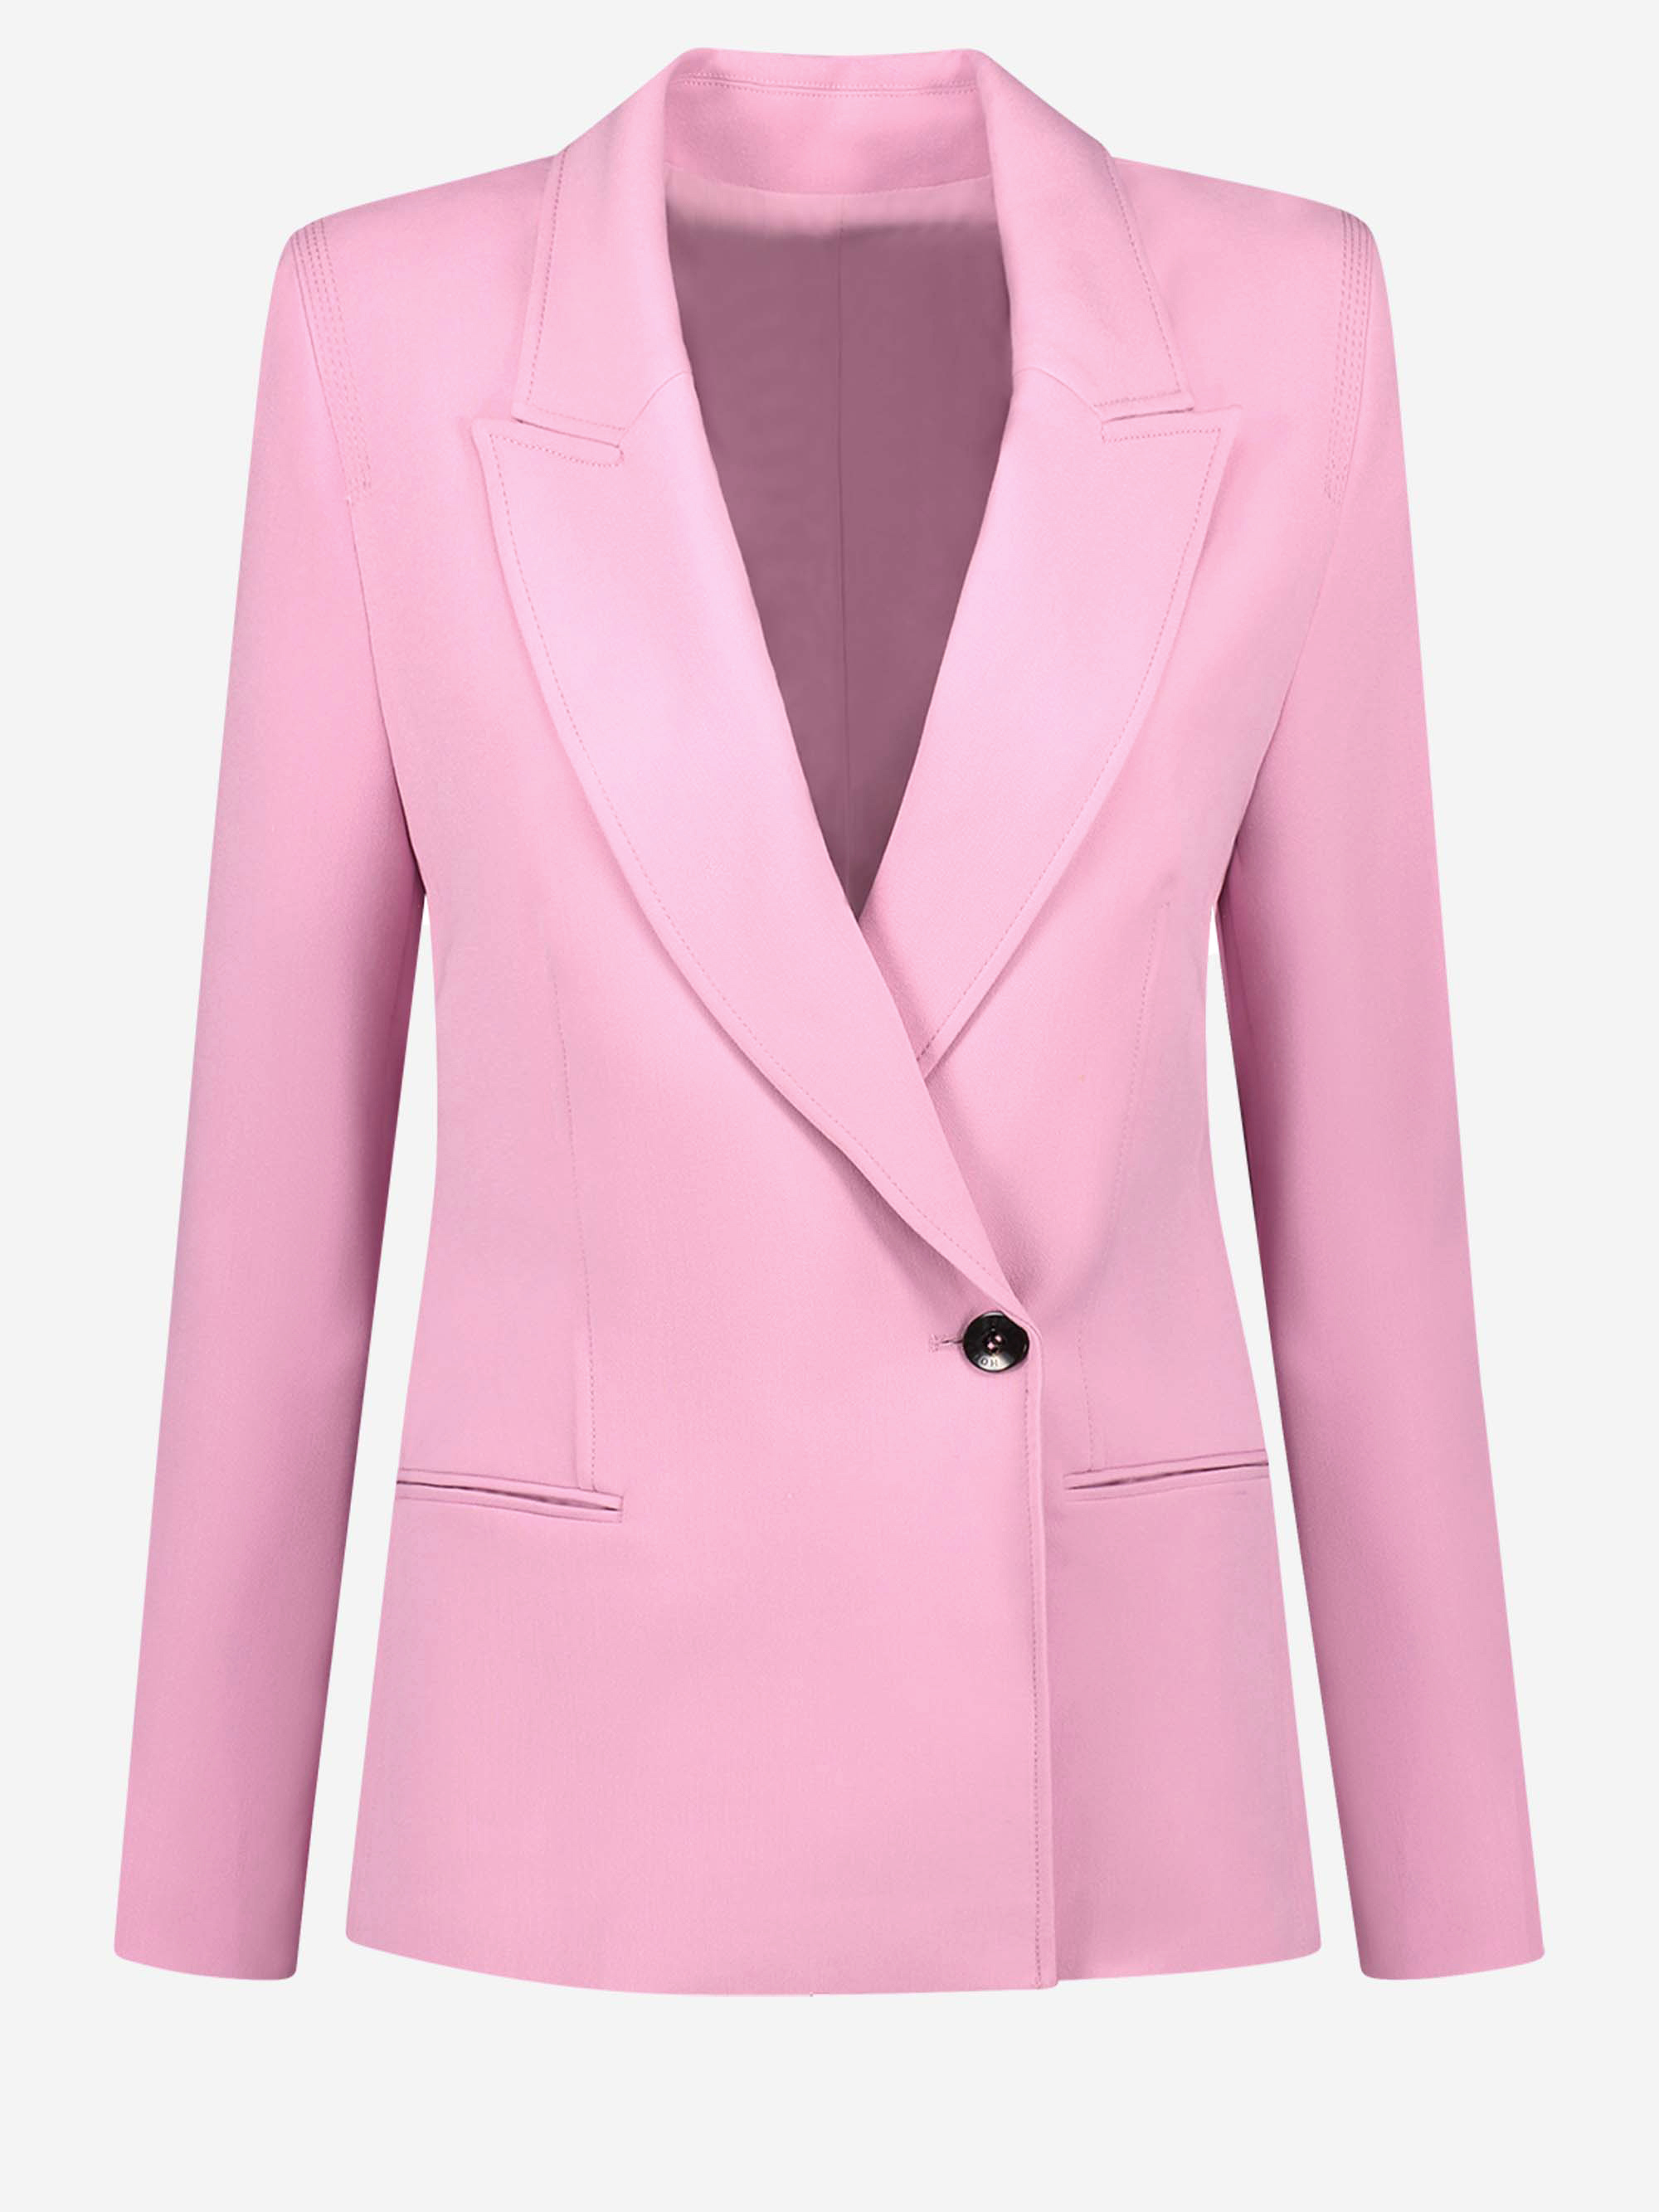 Fitted blazer with lapel collar